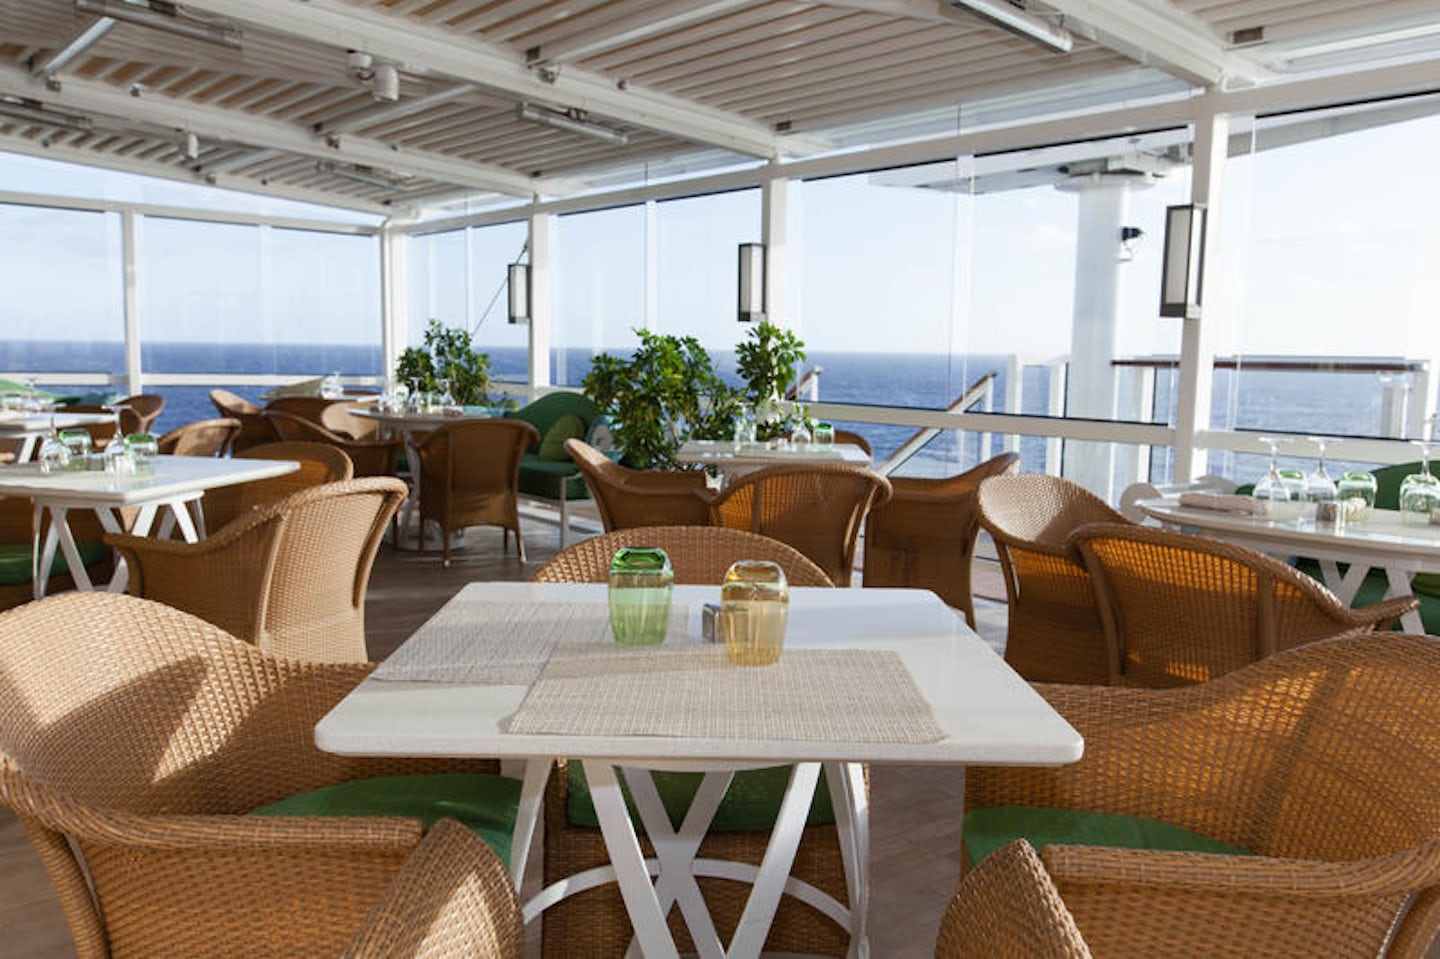 The Porch on Celebrity Silhouette